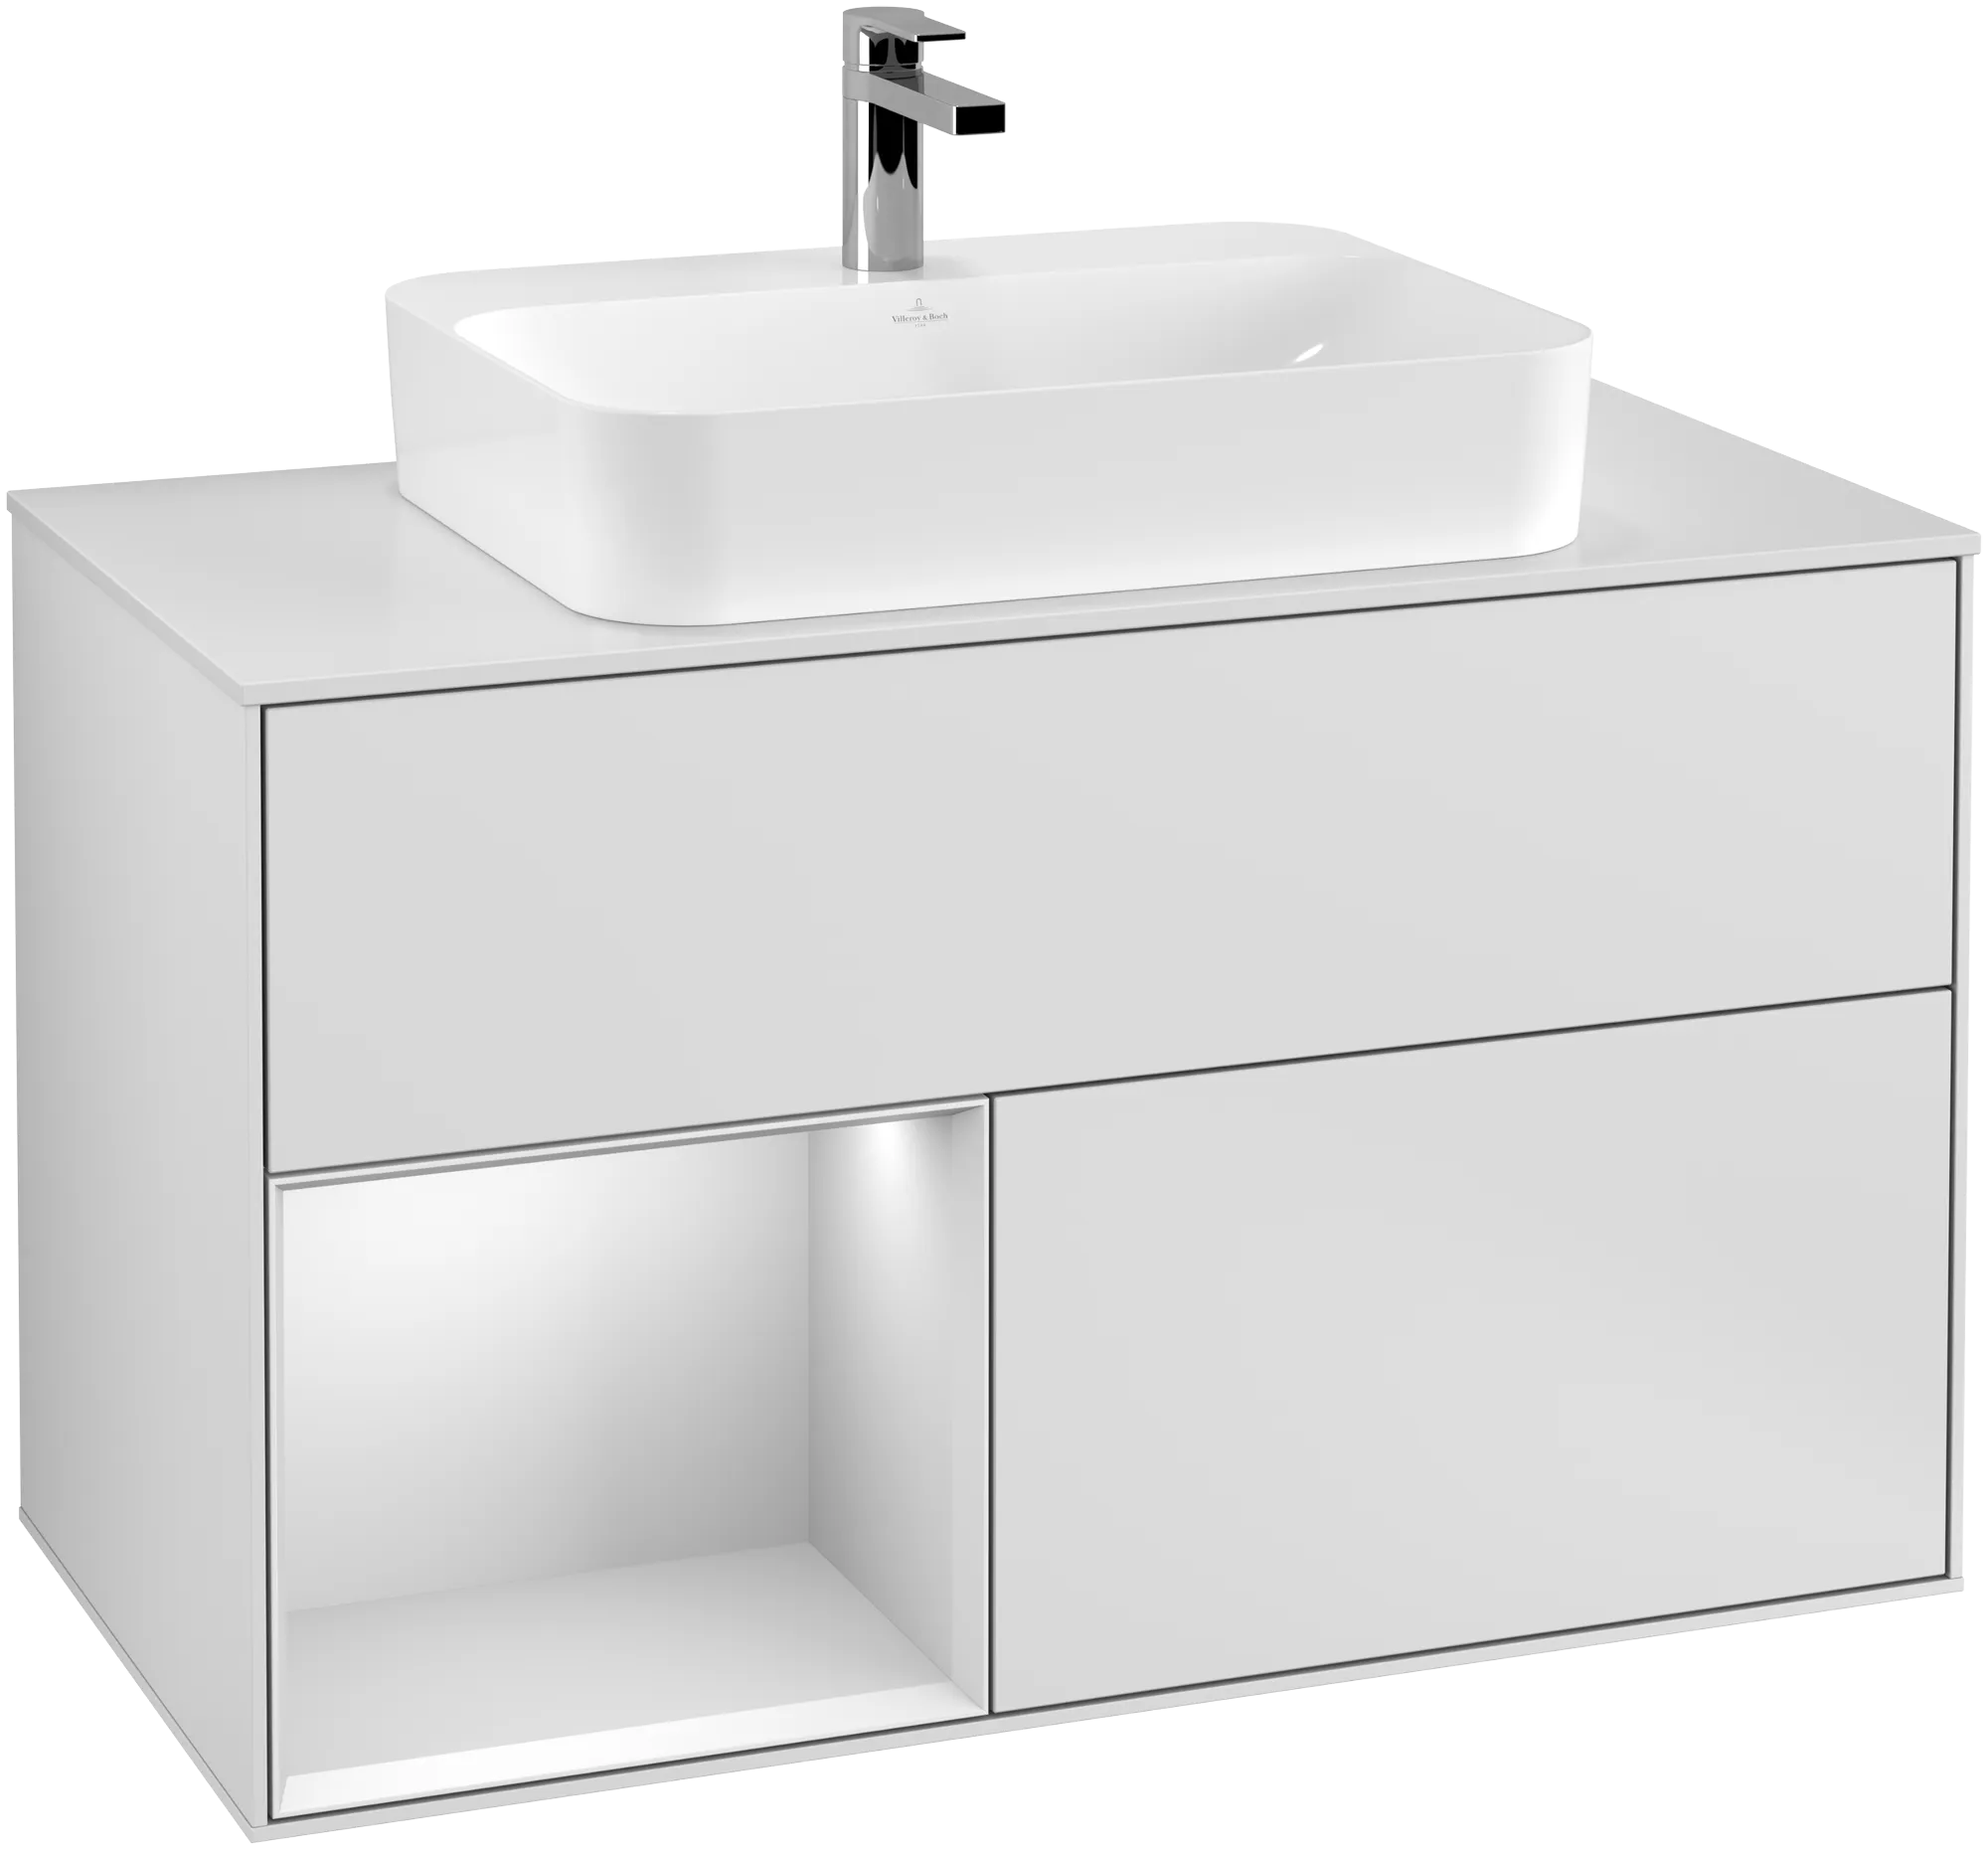 Picture of VILLEROY BOCH Finion Vanity unit, with lighting, 2 pull-out compartments, 1000 x 603 x 501 mm, White Matt Lacquer / White Matt Lacquer / Glass White Matt #G361MTMT